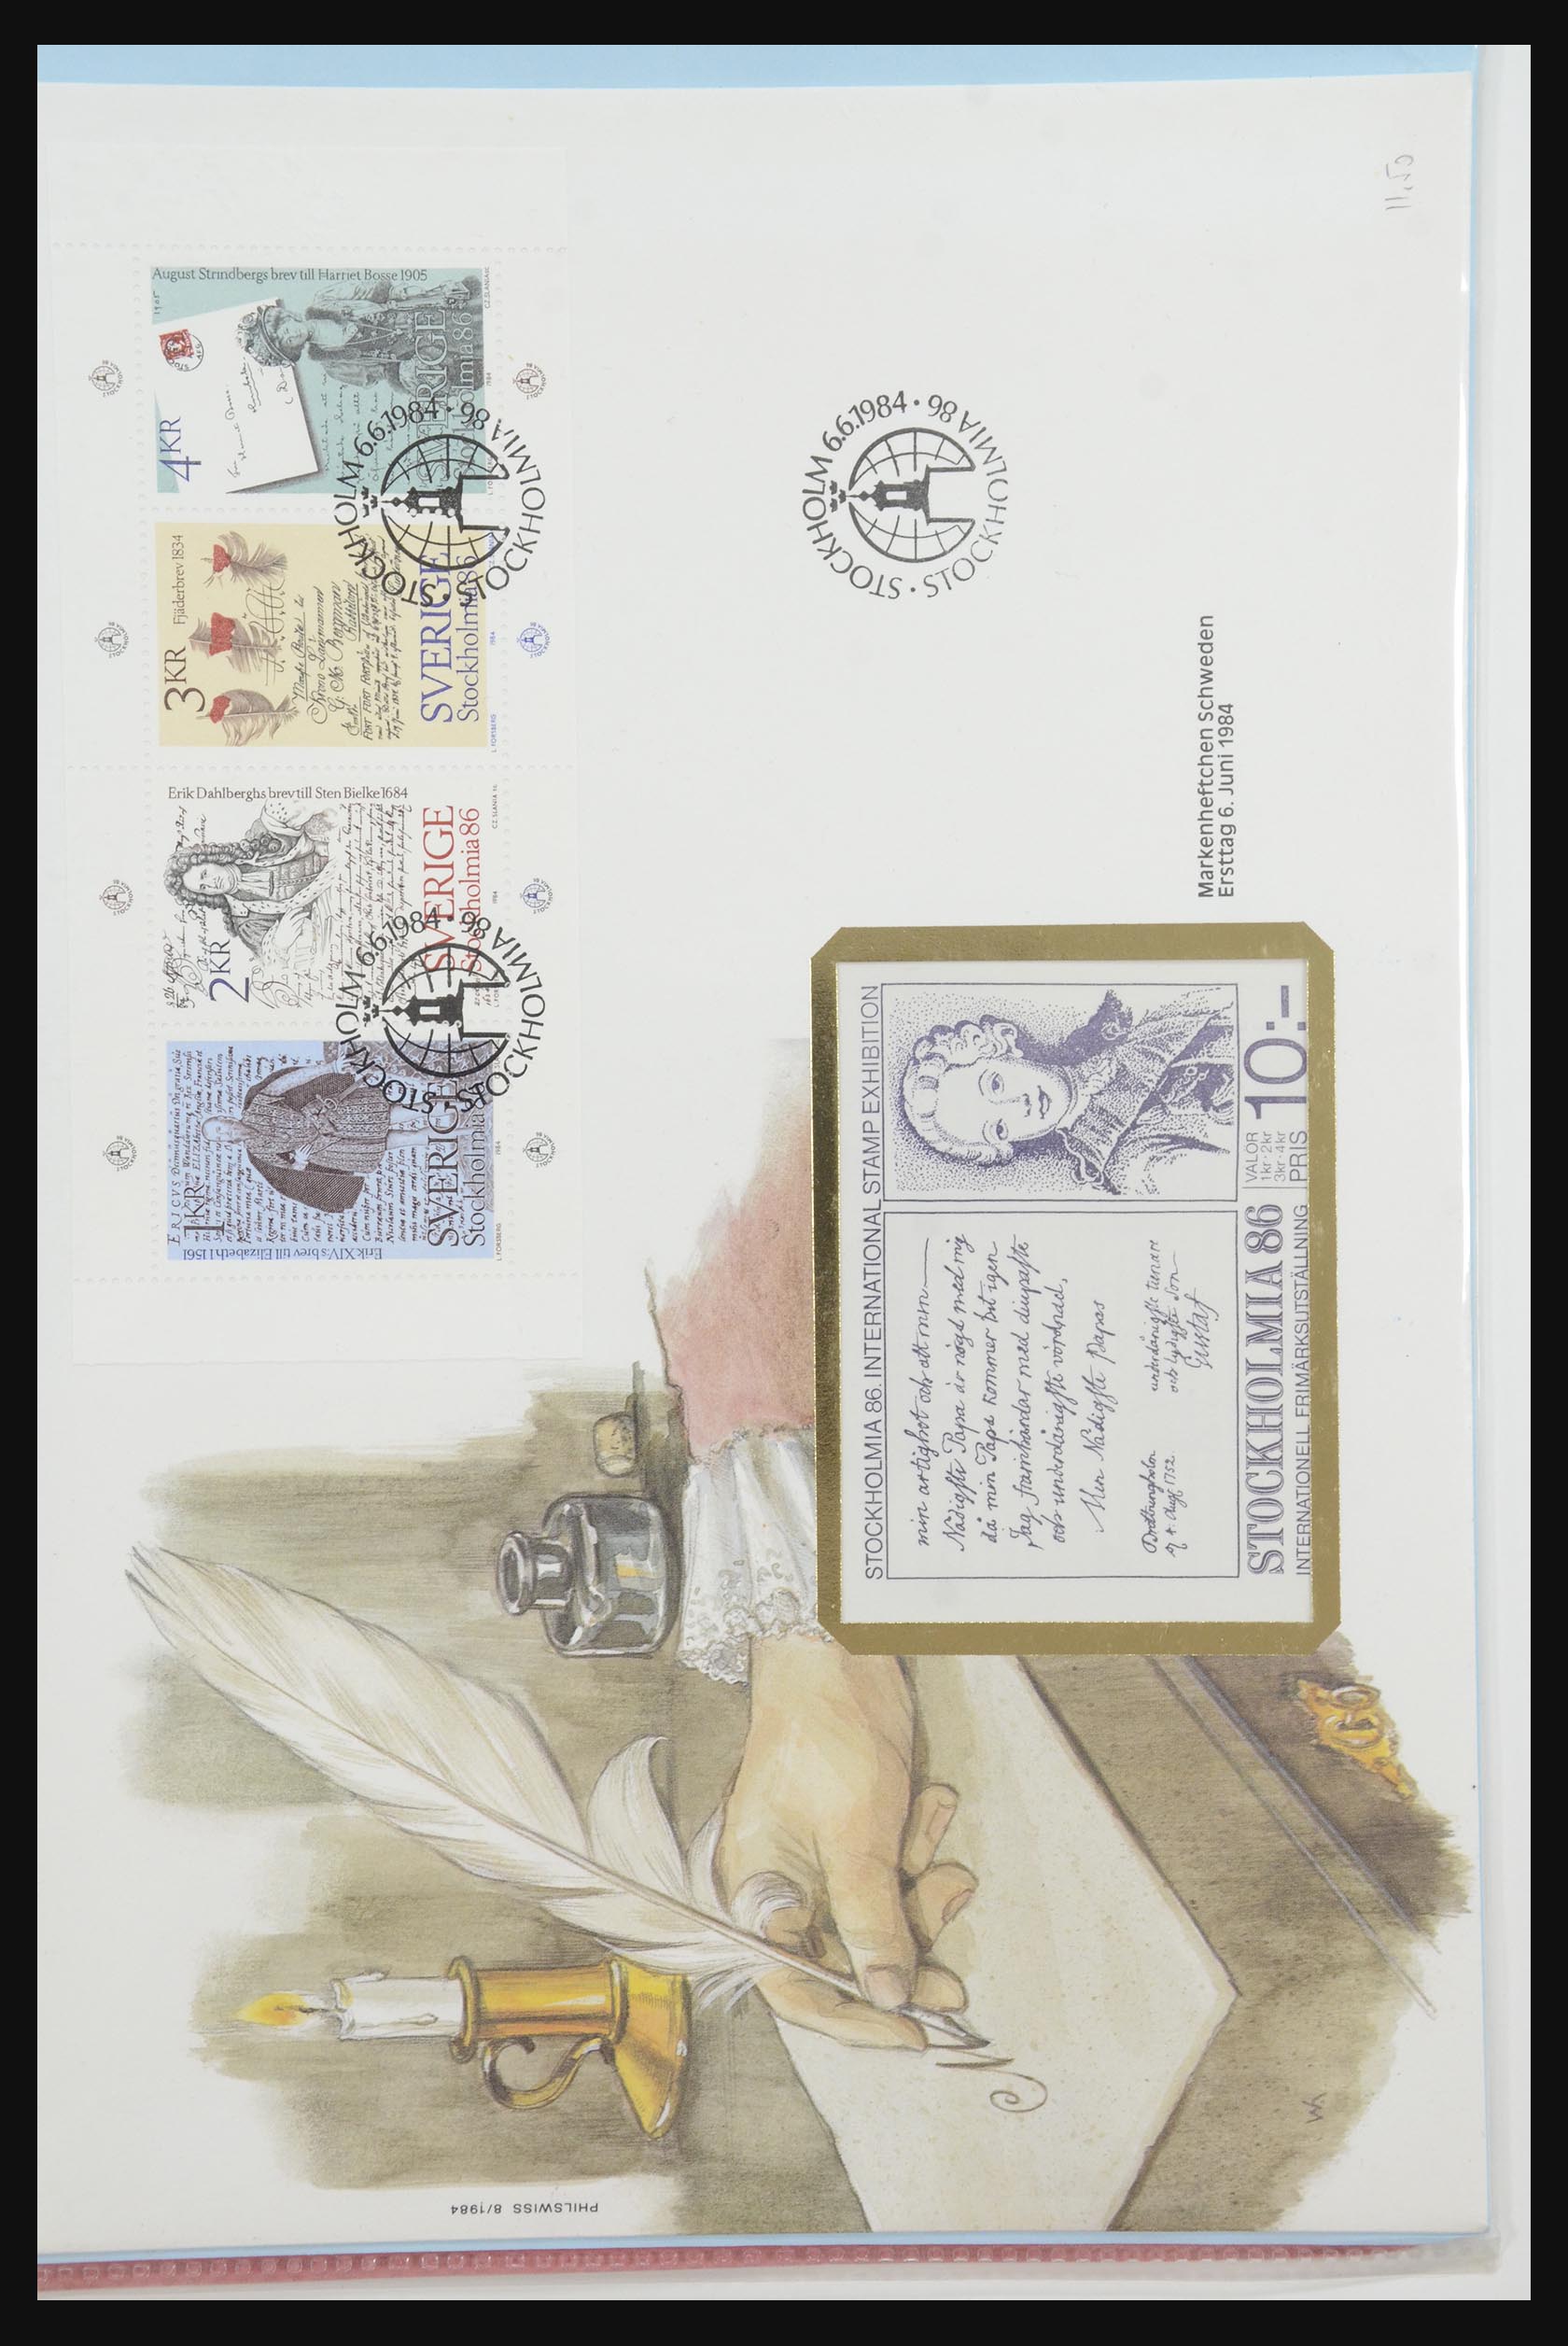 31915 393 - 31915 Western Europe souvenir sheets and stamp booklets on FDC.